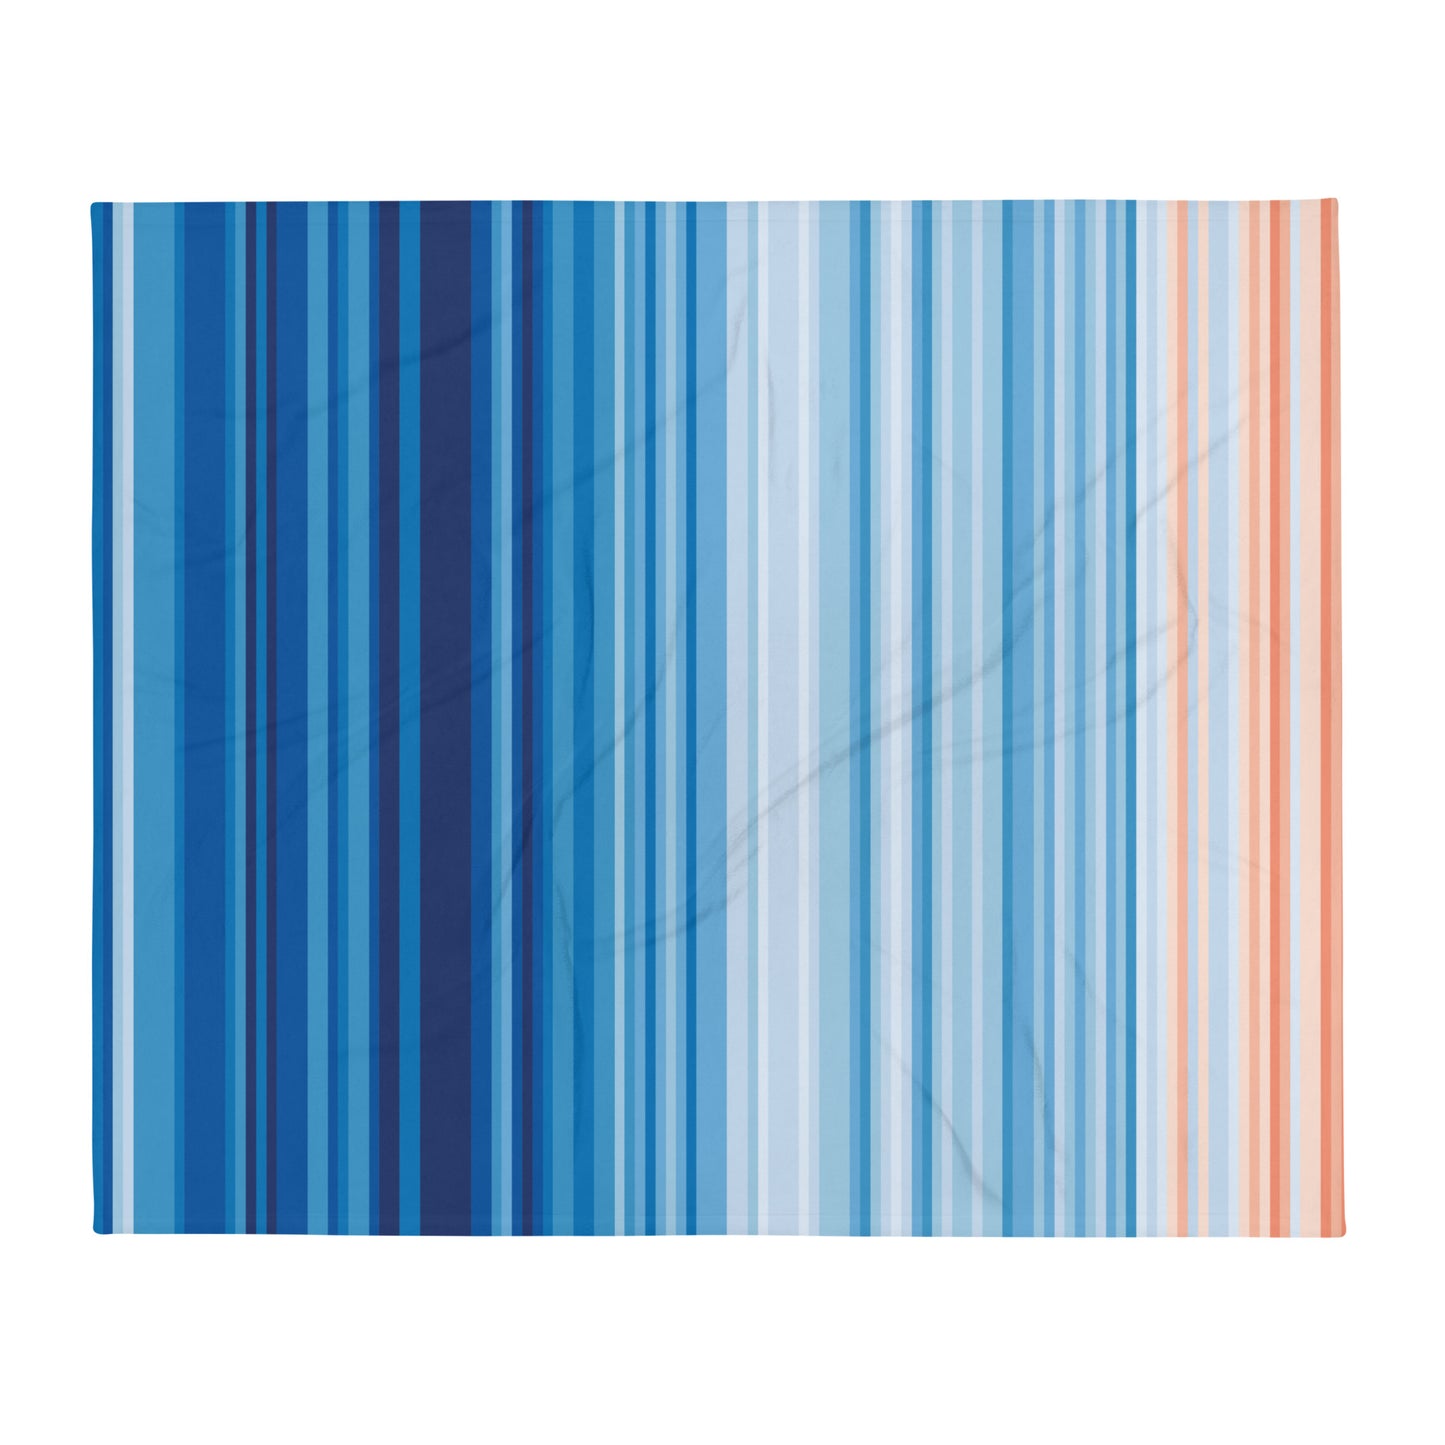 Climate Change Global Warming Stripes - Sustainably Made Throw Blanket